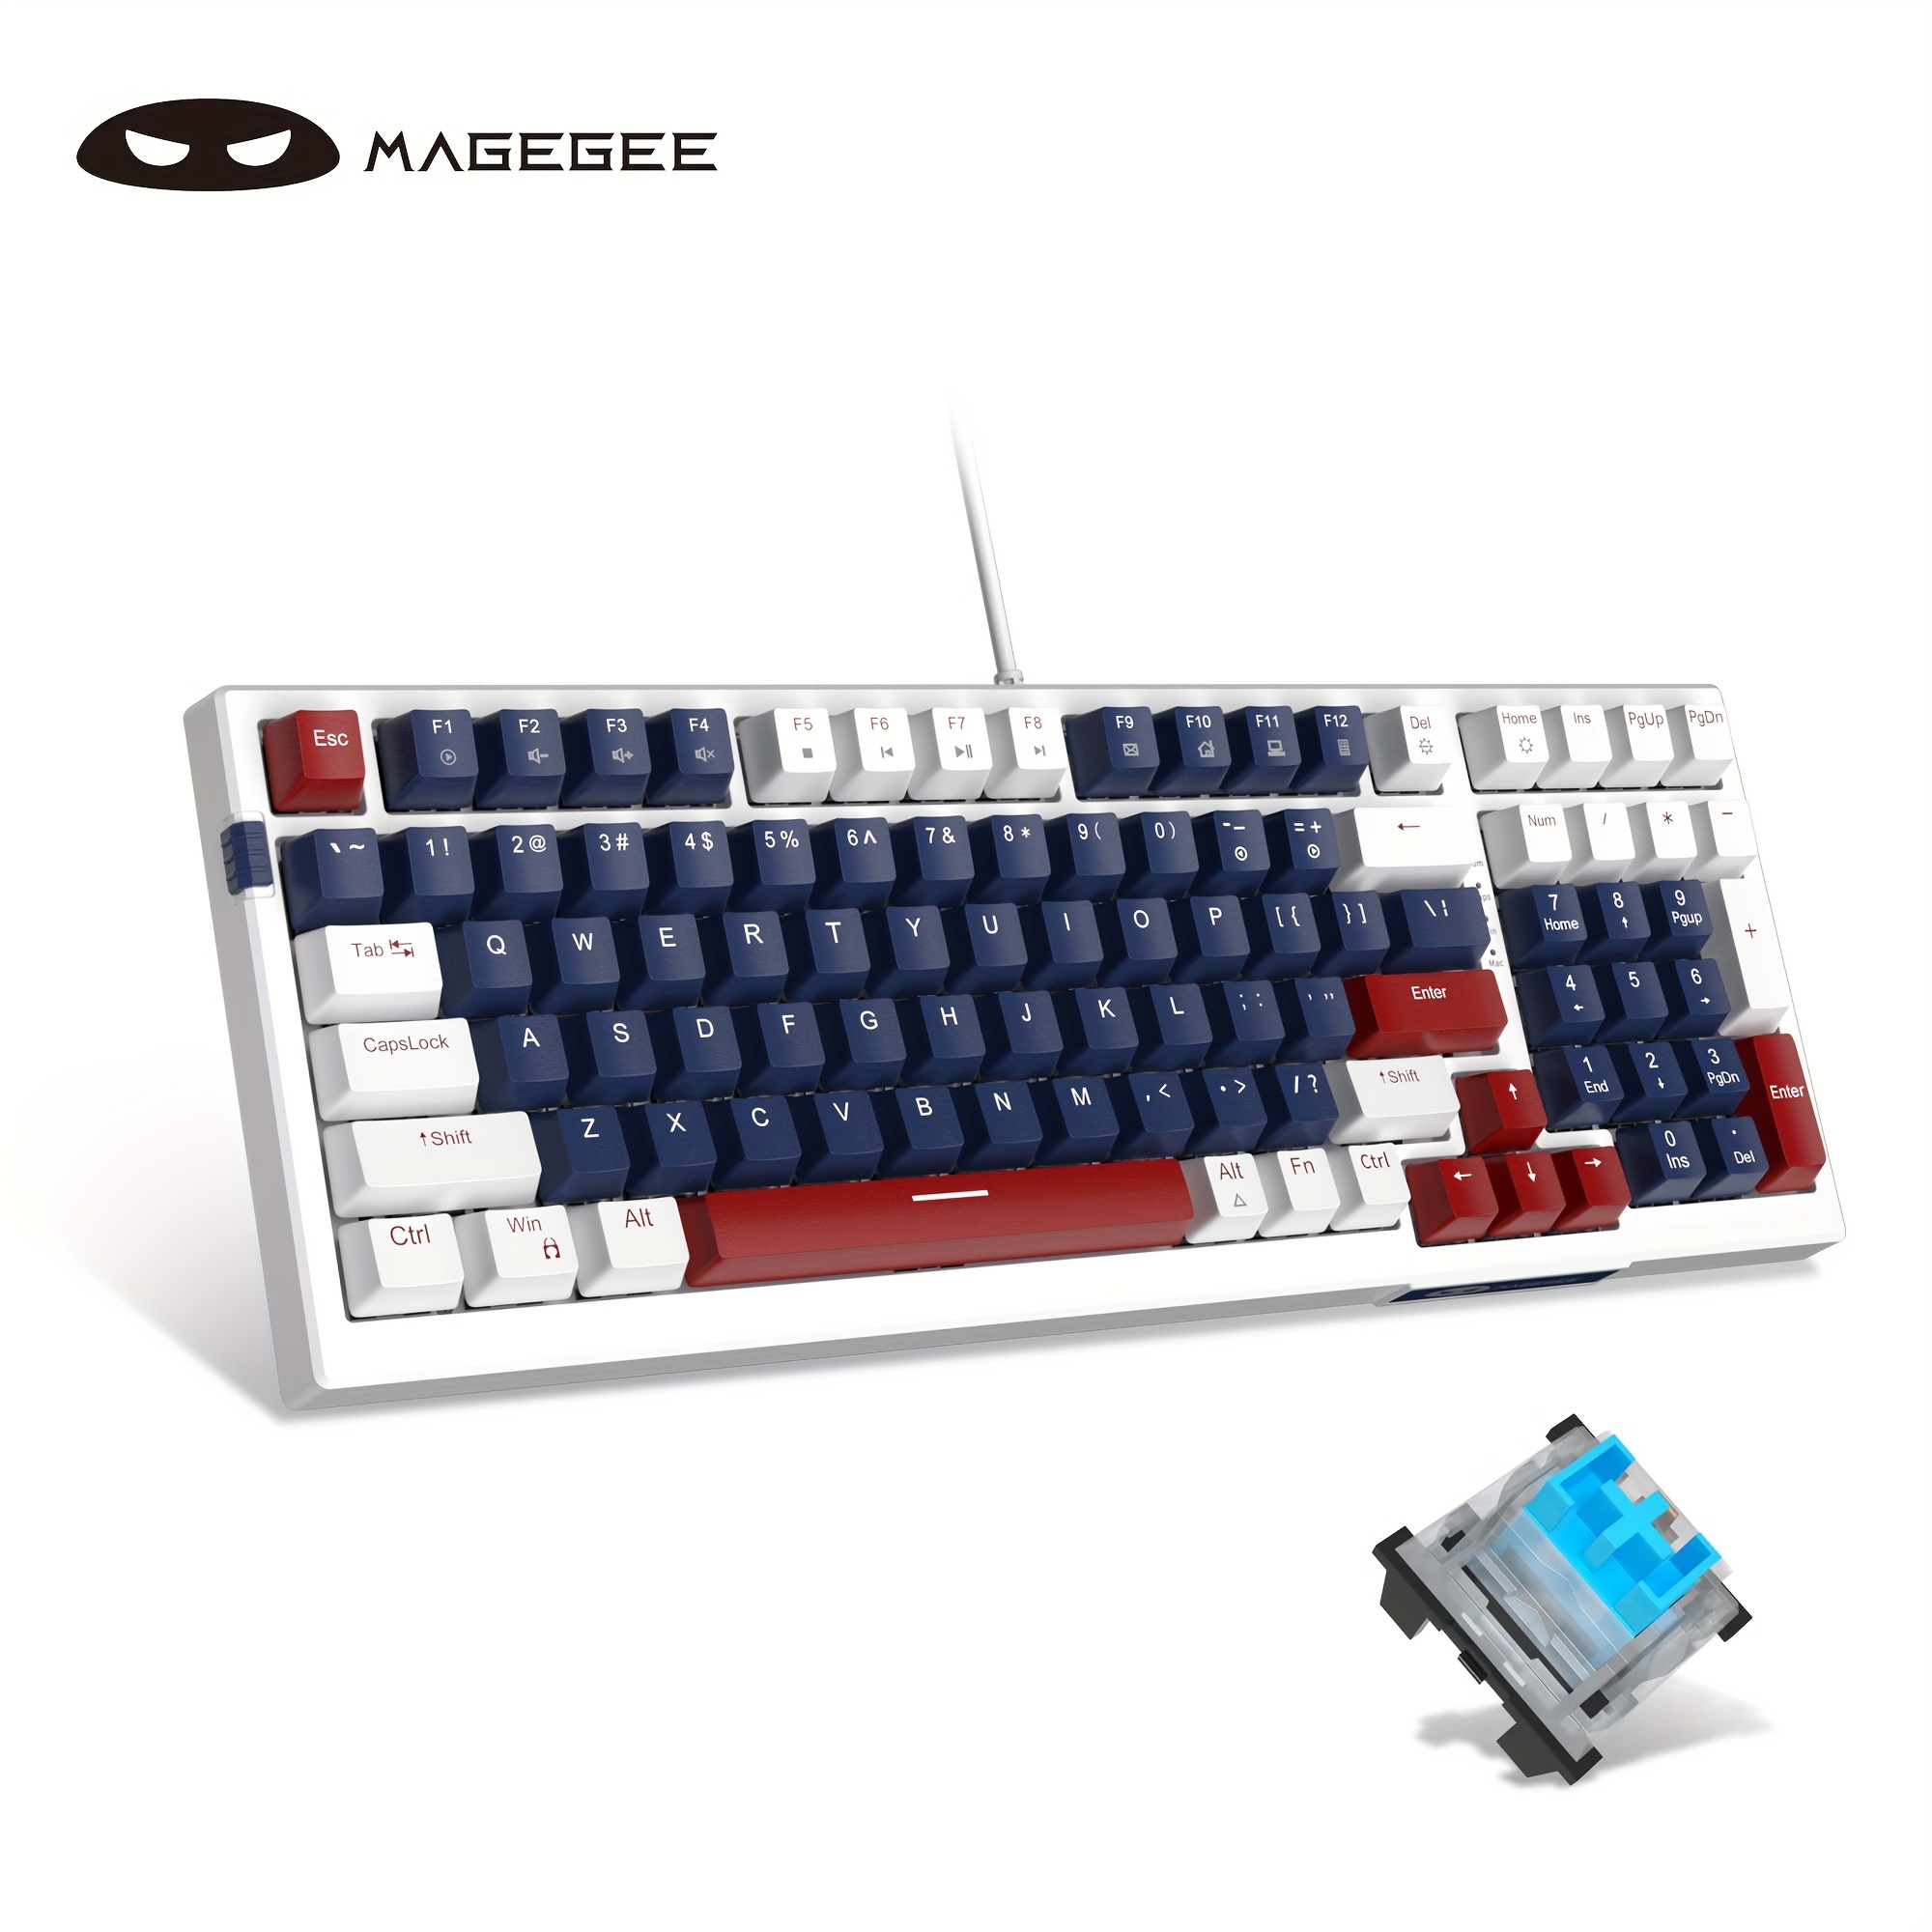 

Magegee Mechanical Keyboard, Star Sky Wired Gaming Keyboard Backlit Ultra-slim Usb Keyboards With Red Switches 98 Keys For Pc Laptop